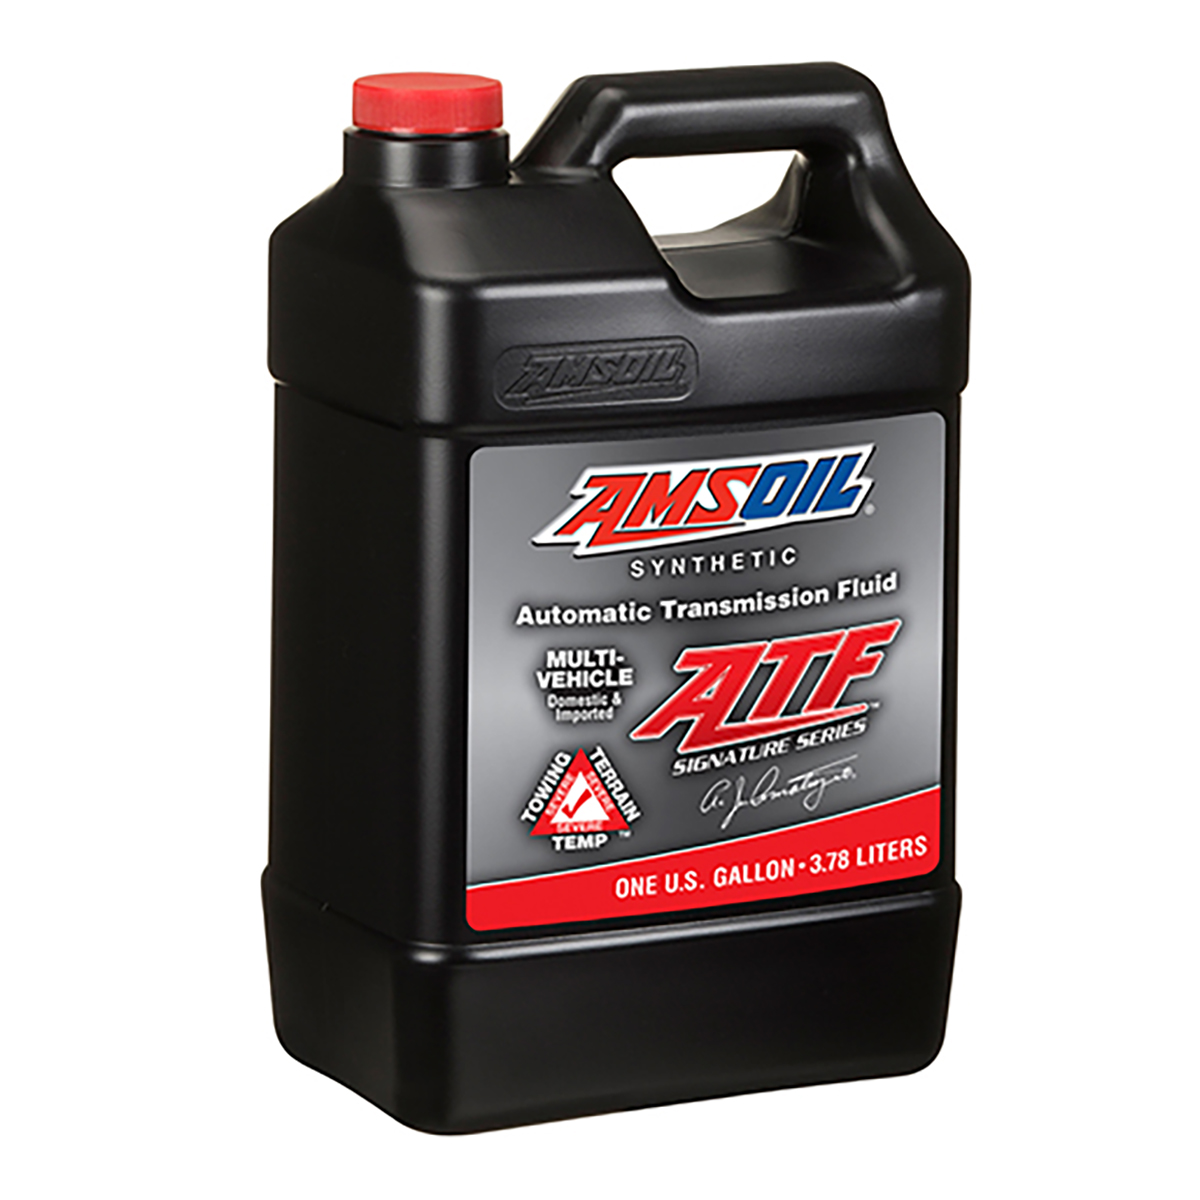 Signature Series Multi-Vehicle Synthetic Automatic Transmission Fluid, 1G